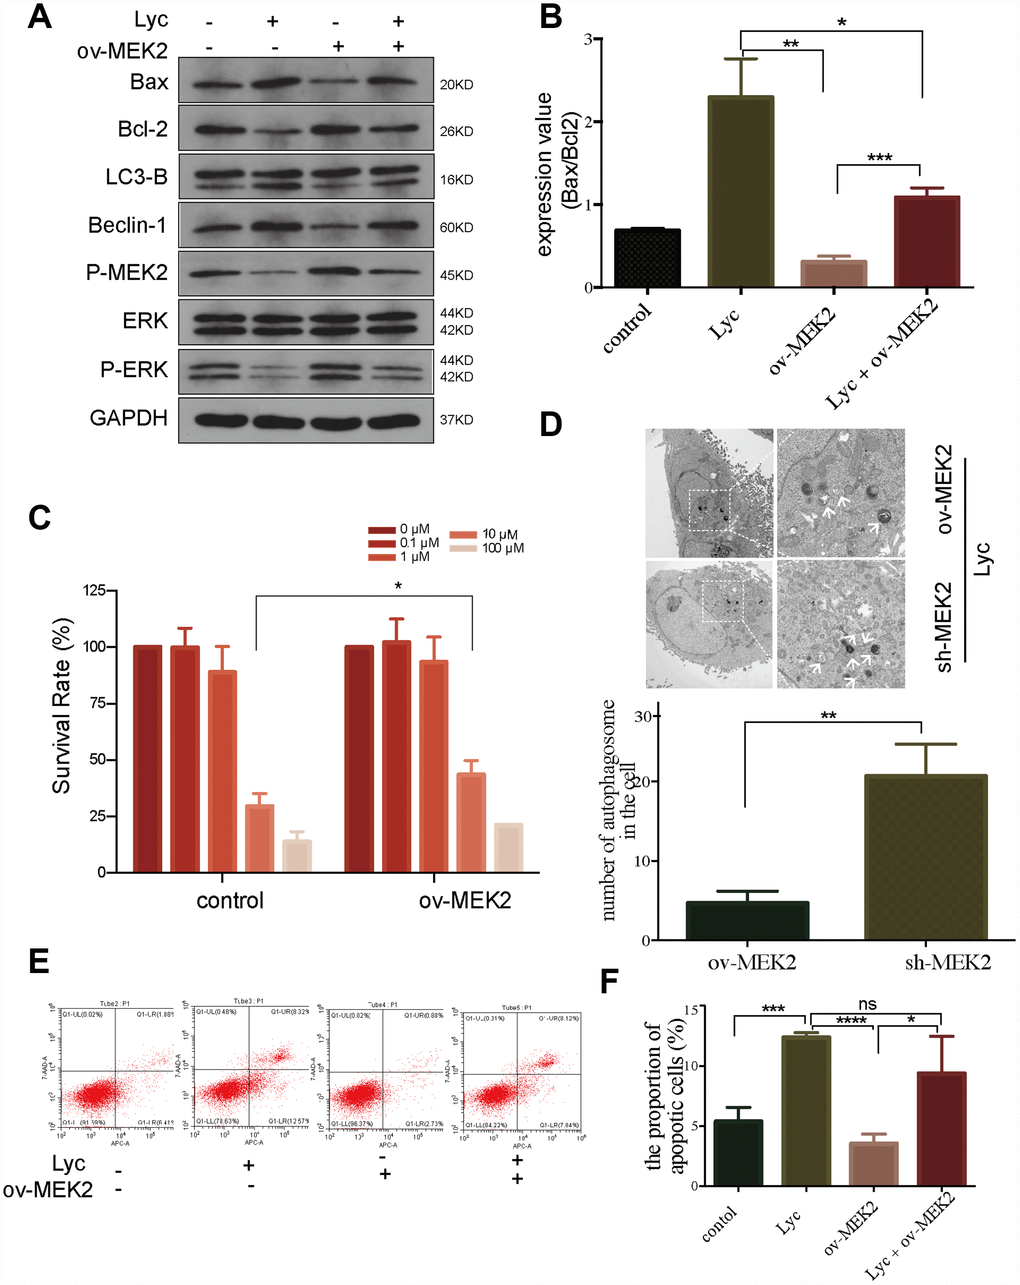 Lycorine induces autophagy-associated apoptosis by targeting mitogen-activated protein kinase kinase 2 (MEK2). (A-B) HCT116 cells transfected with blank or MEK2 vectors were treated with or without lycorine, and western blotting was performed to investigate the changes in autophagy and apoptosis. GAPDH was used as a loading control. (C) The viability of HCT116 cells transfected with blank or MEK2 vectors in response to the indicated concentrations of lycorine was detected using the Cell Counting Kit-8 assay. (D) HCT116 cells were transfected with MEK2 shRNA and cultured in the presence of lycorine, and the change in autophagy was analyzed using transmission electron microscopy. Magnification: ×1700 (left), ×5000 (right). (E–F) MEK2-overexpressing or control HCT116 cells were treated with lycorine for 24 h and analyzed using annexin V/PI flow cytometry. The right lower quadrant represents early apoptosis. Data are presented as the mean ± SD of three independent experiments (*p 